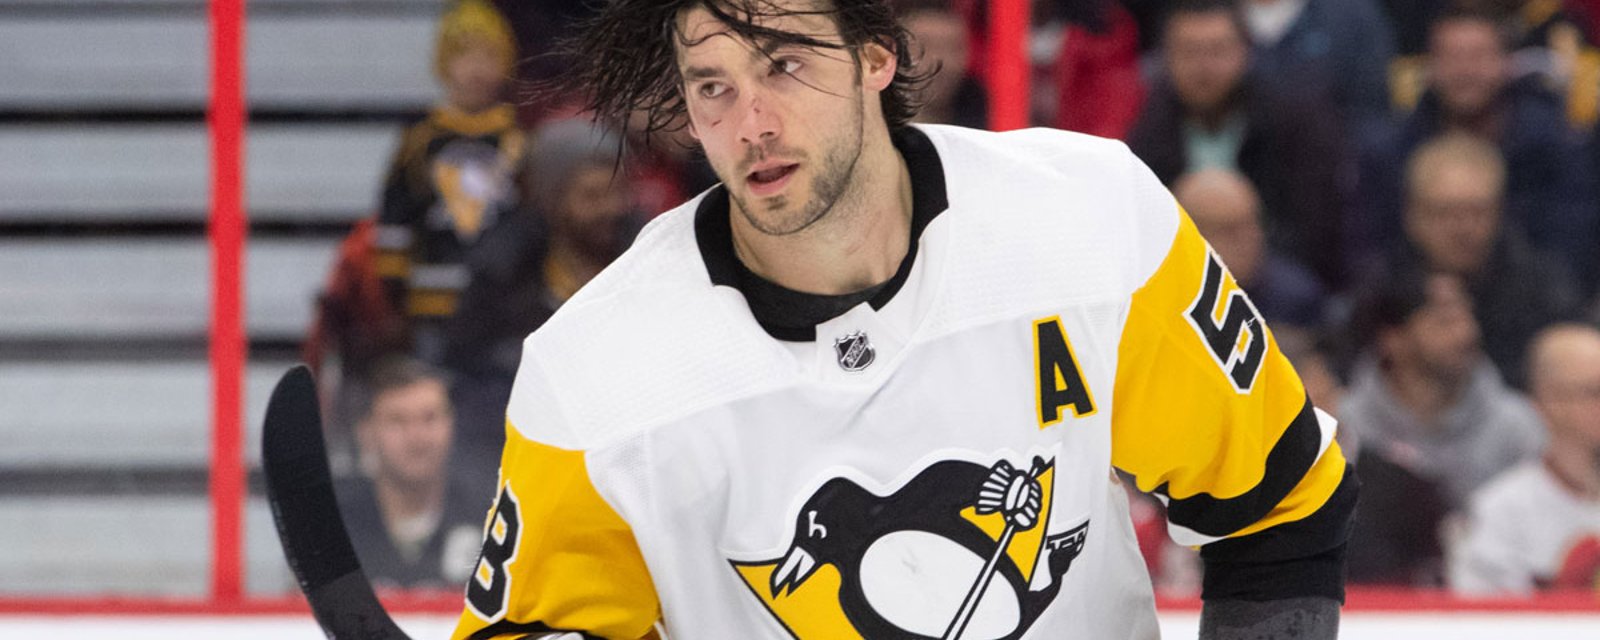 Two Eastern teams in the mix to land Letang!